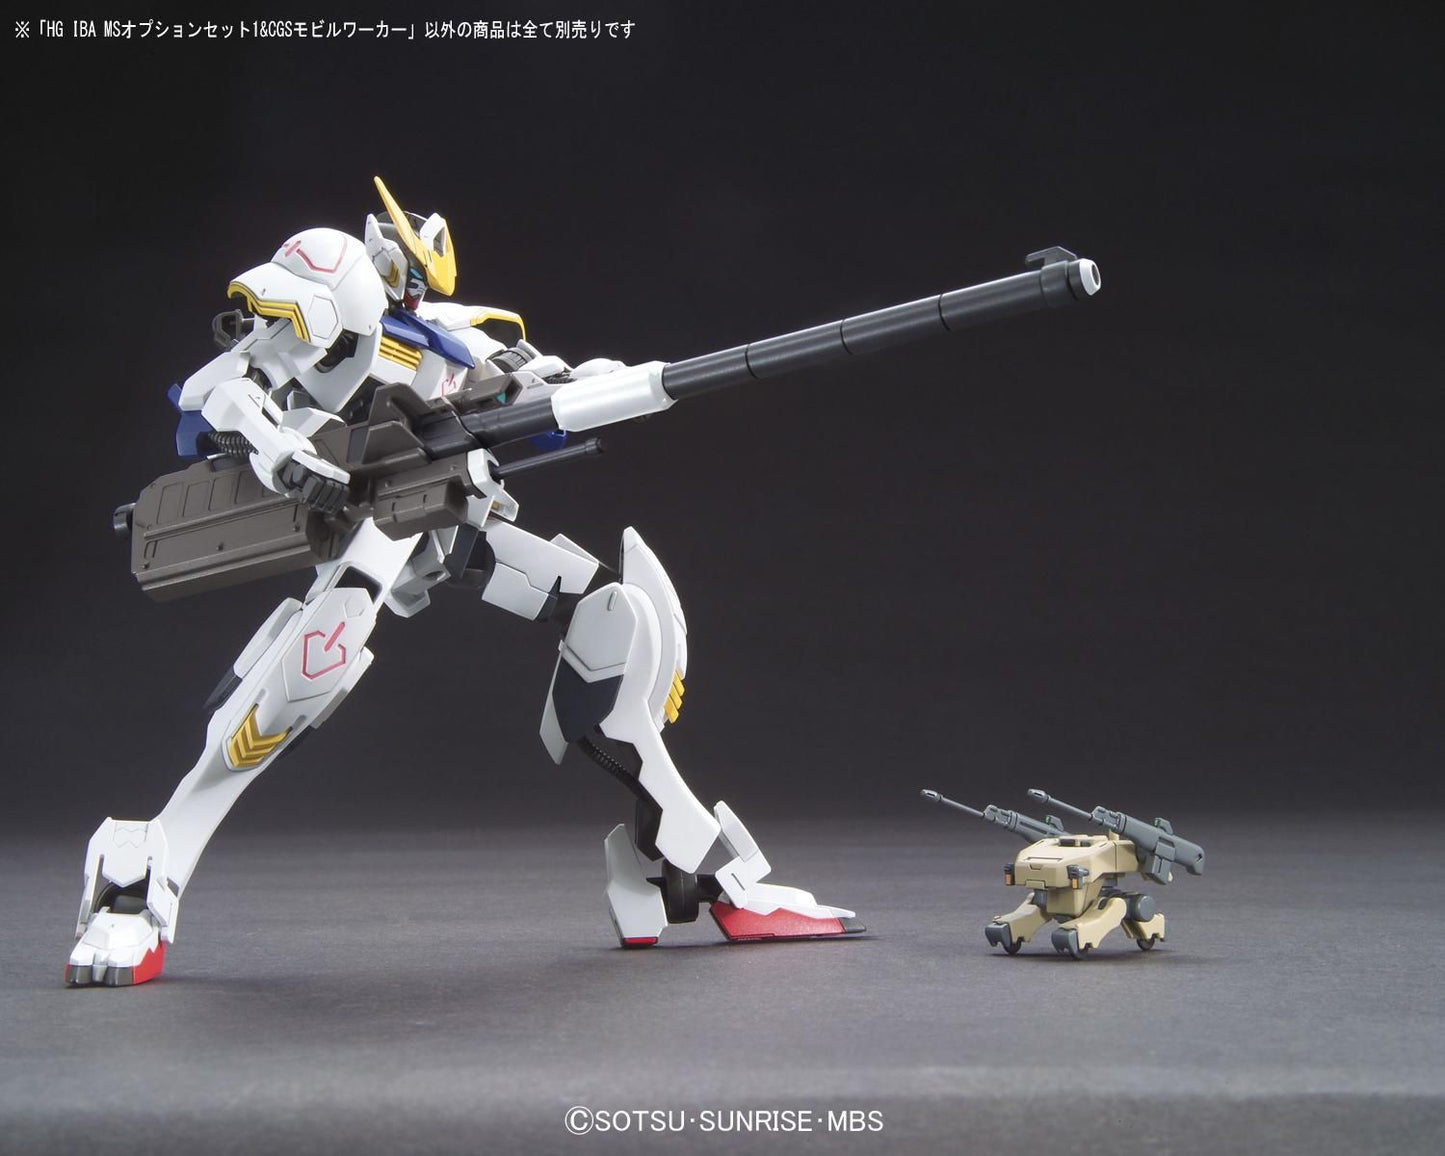 HG IBO Mobile Suit Option Set 1 & CGS Mobile Worker